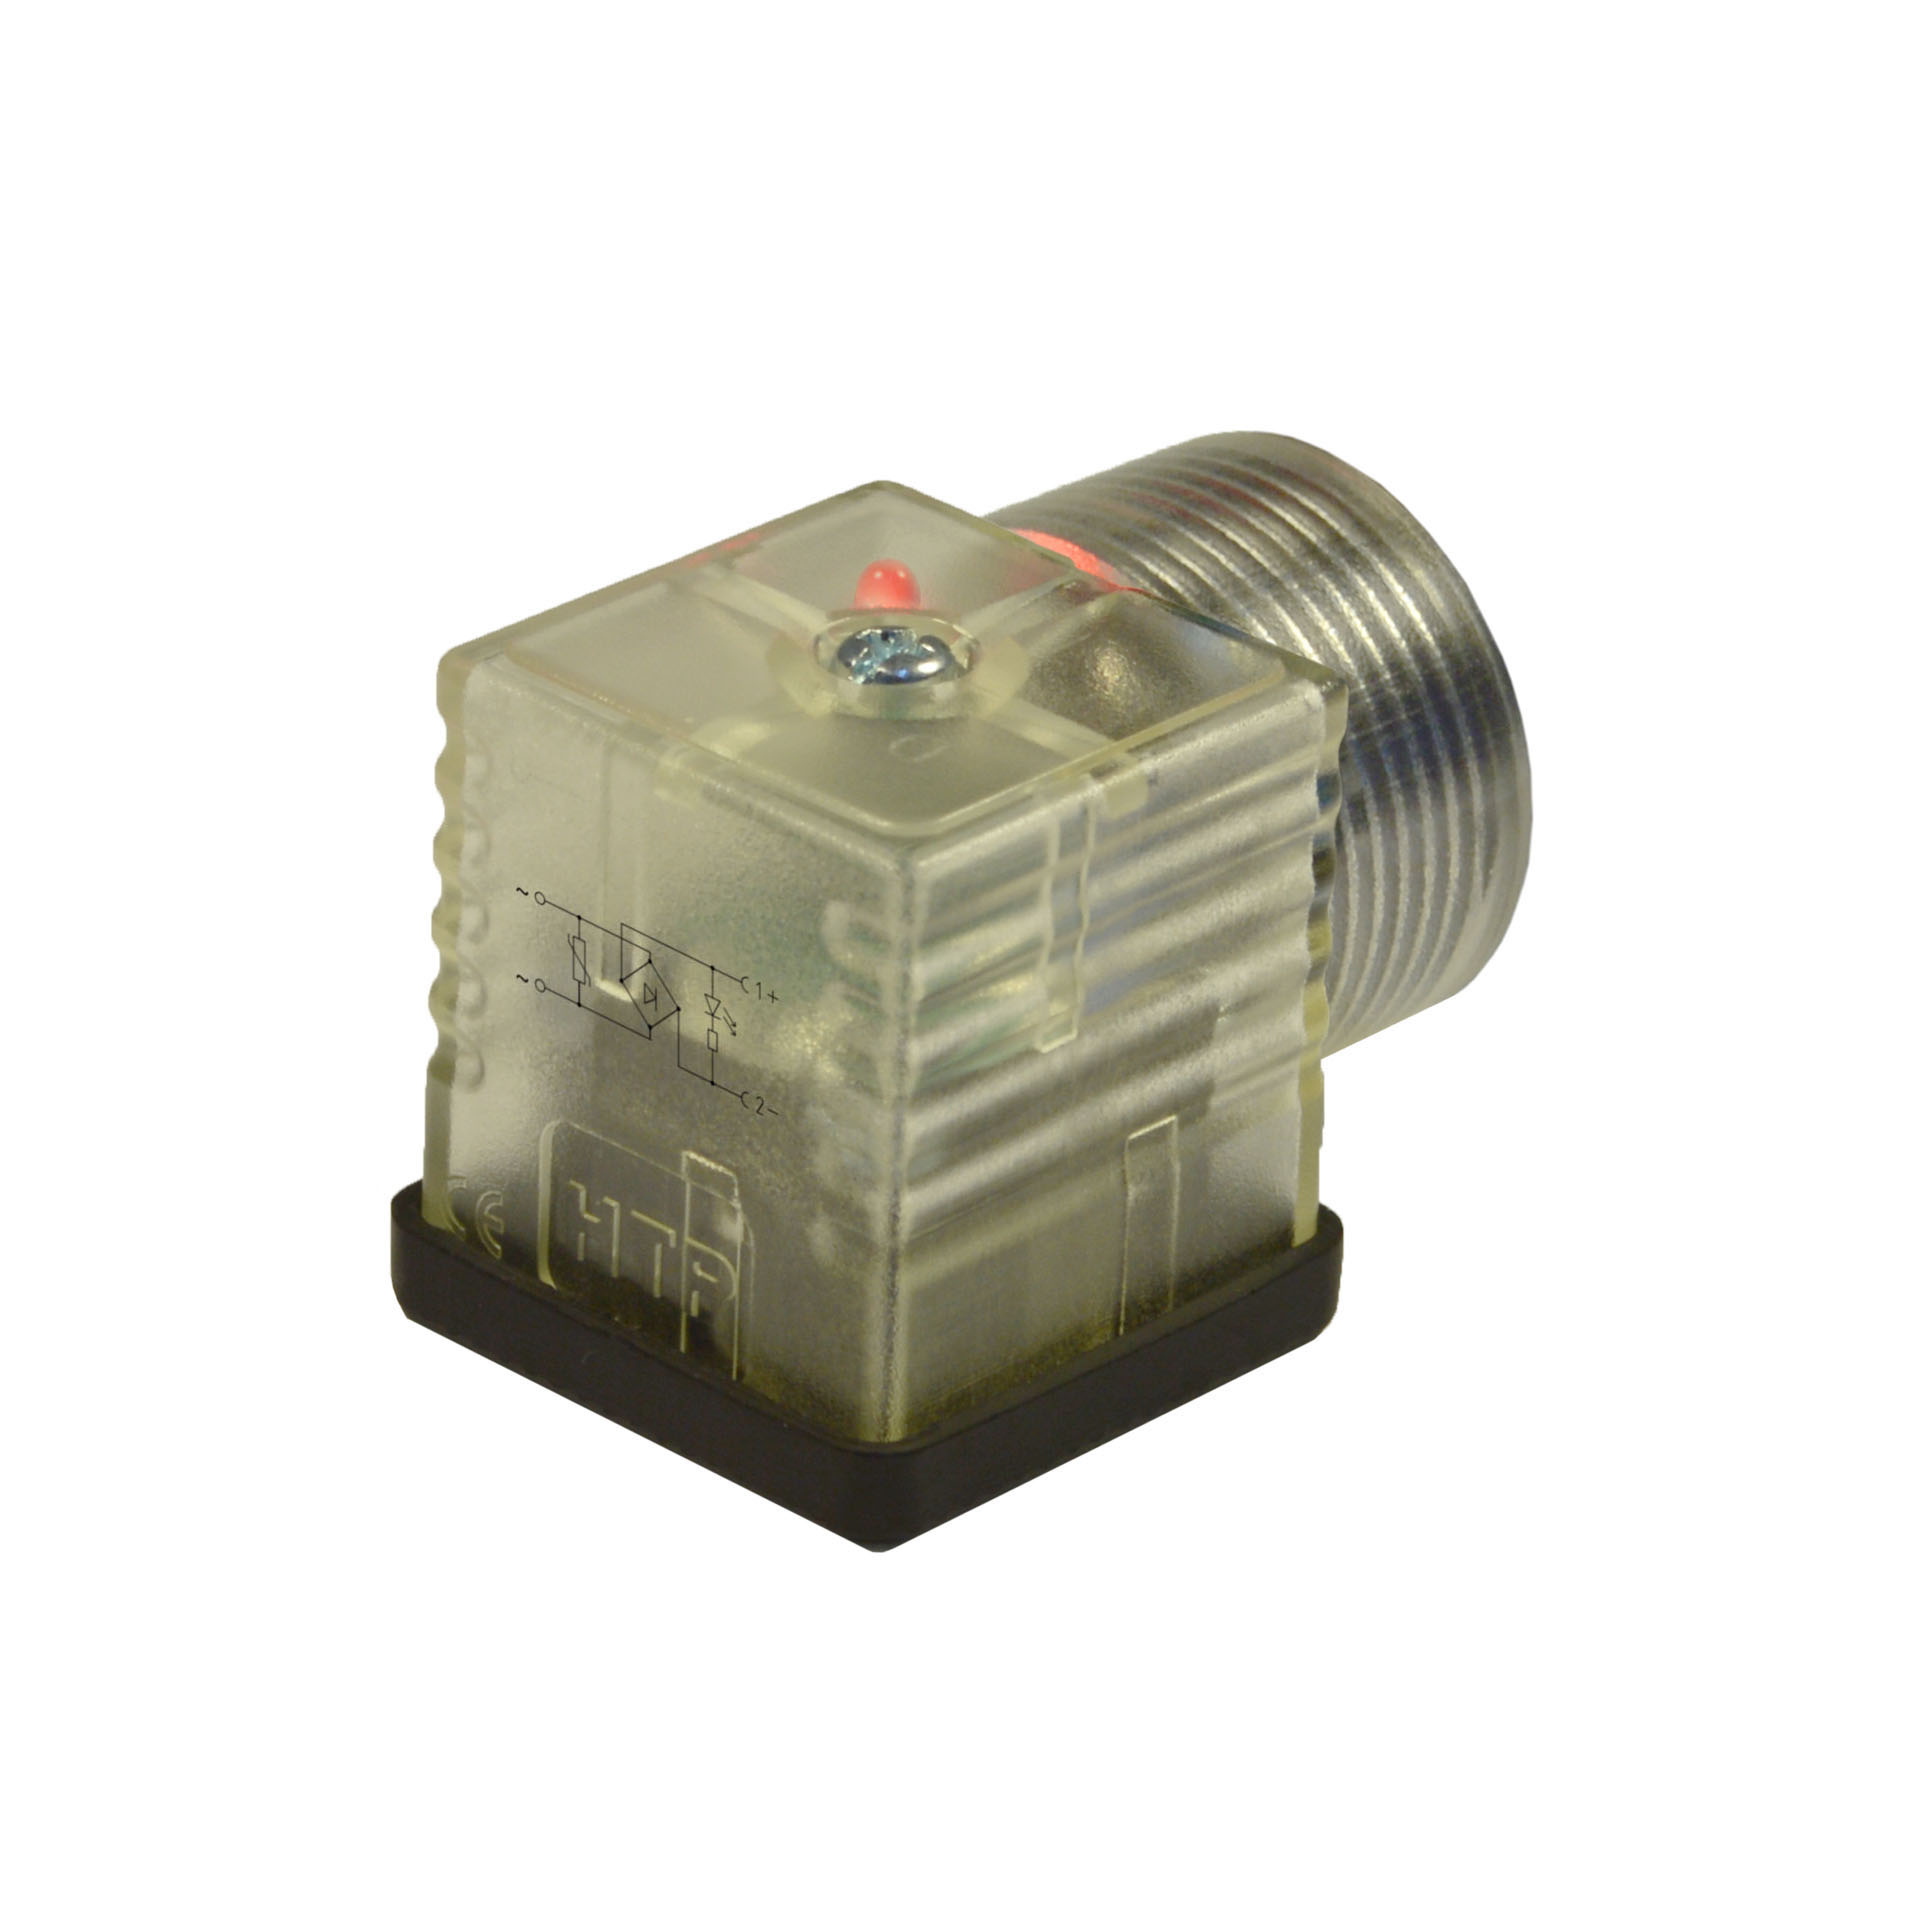 EN175301-803(typeA)field attachable,2p+PE(h.12),Red LED+vdr+rectifier,24VAC,1/2"NPTF